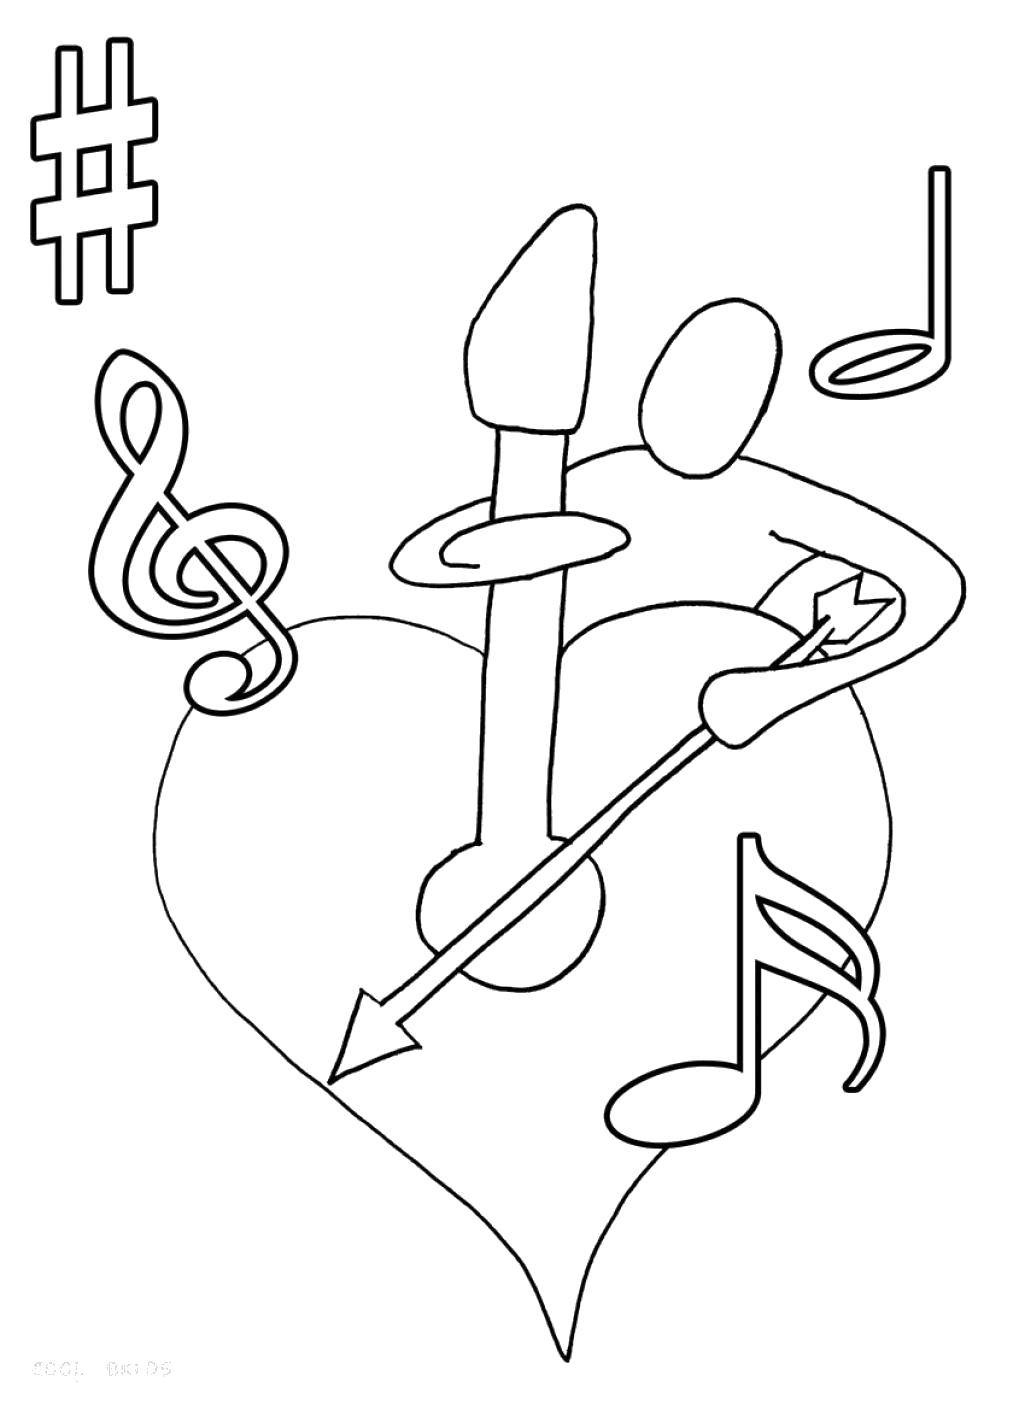 Coloring Game heart. Category Music. Tags:  Music, instrument, musician.